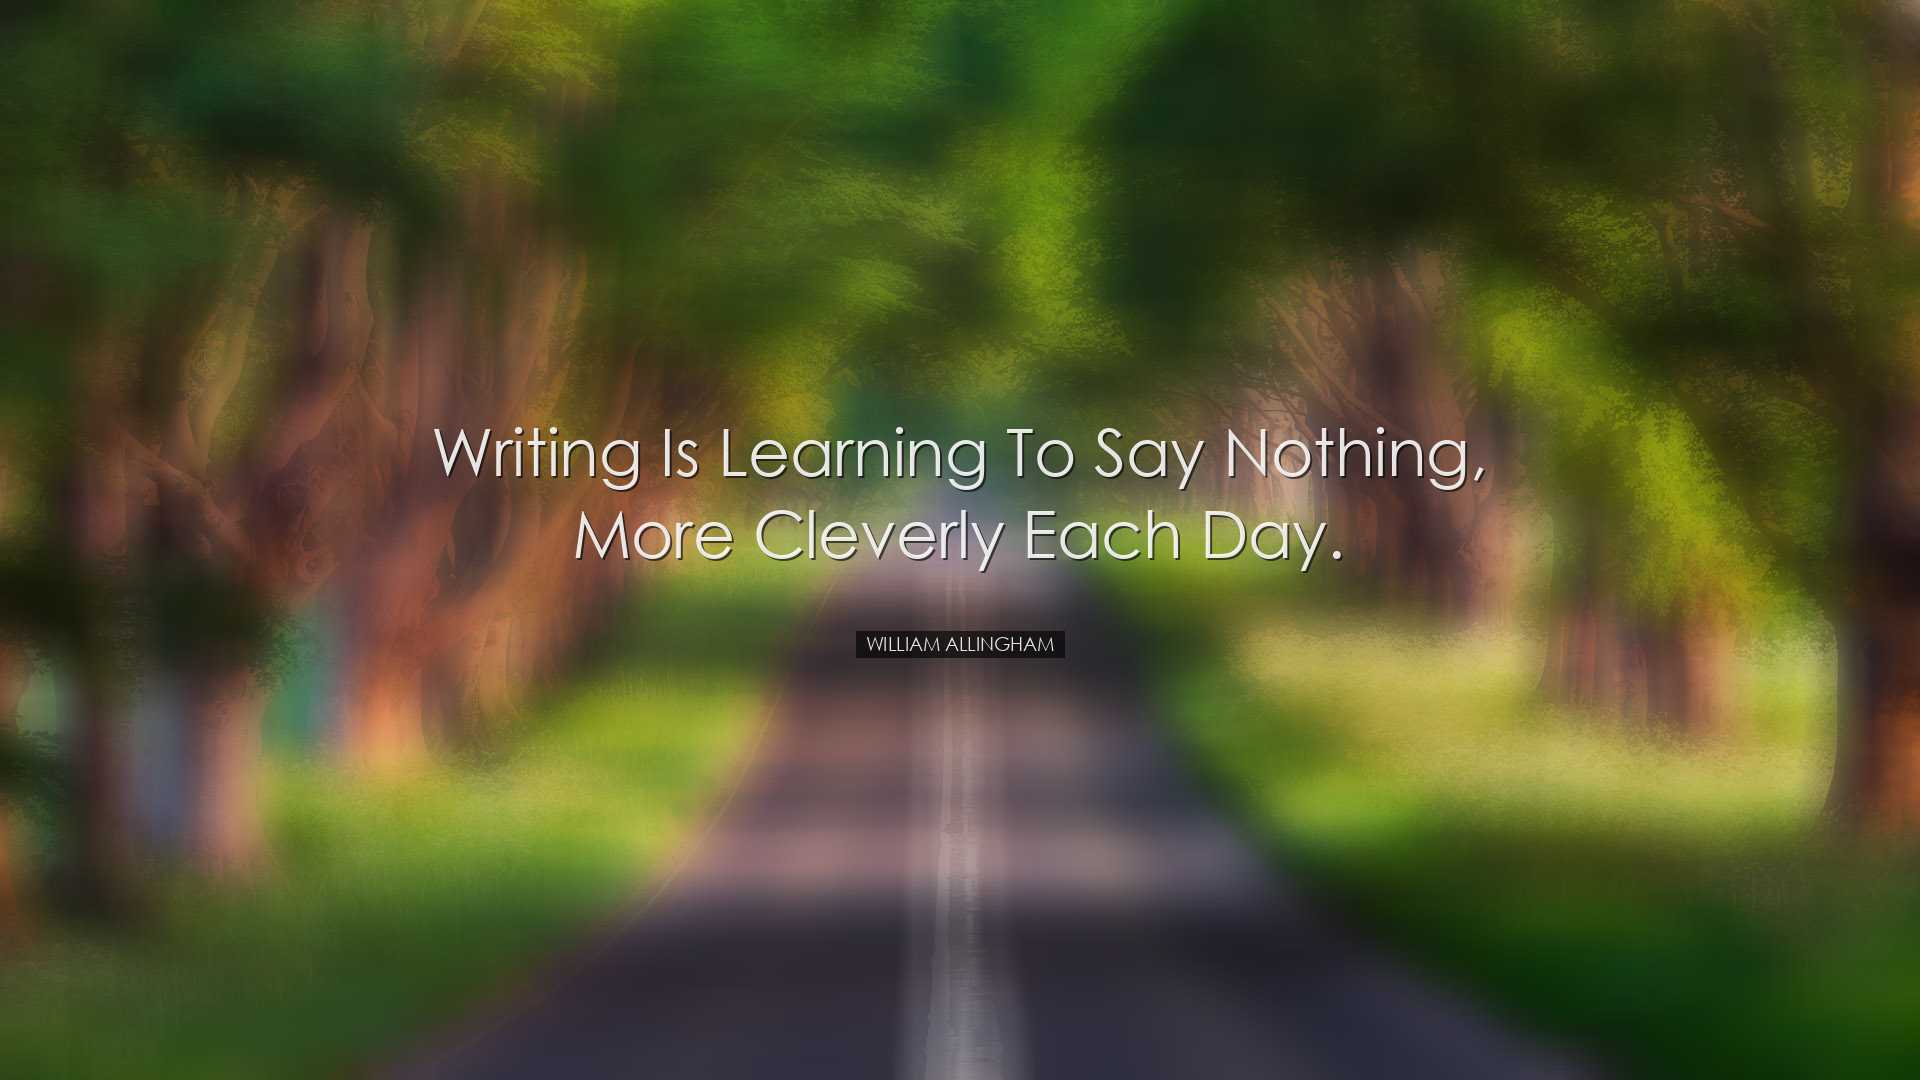 Writing is learning to say nothing, more cleverly each day. - Will